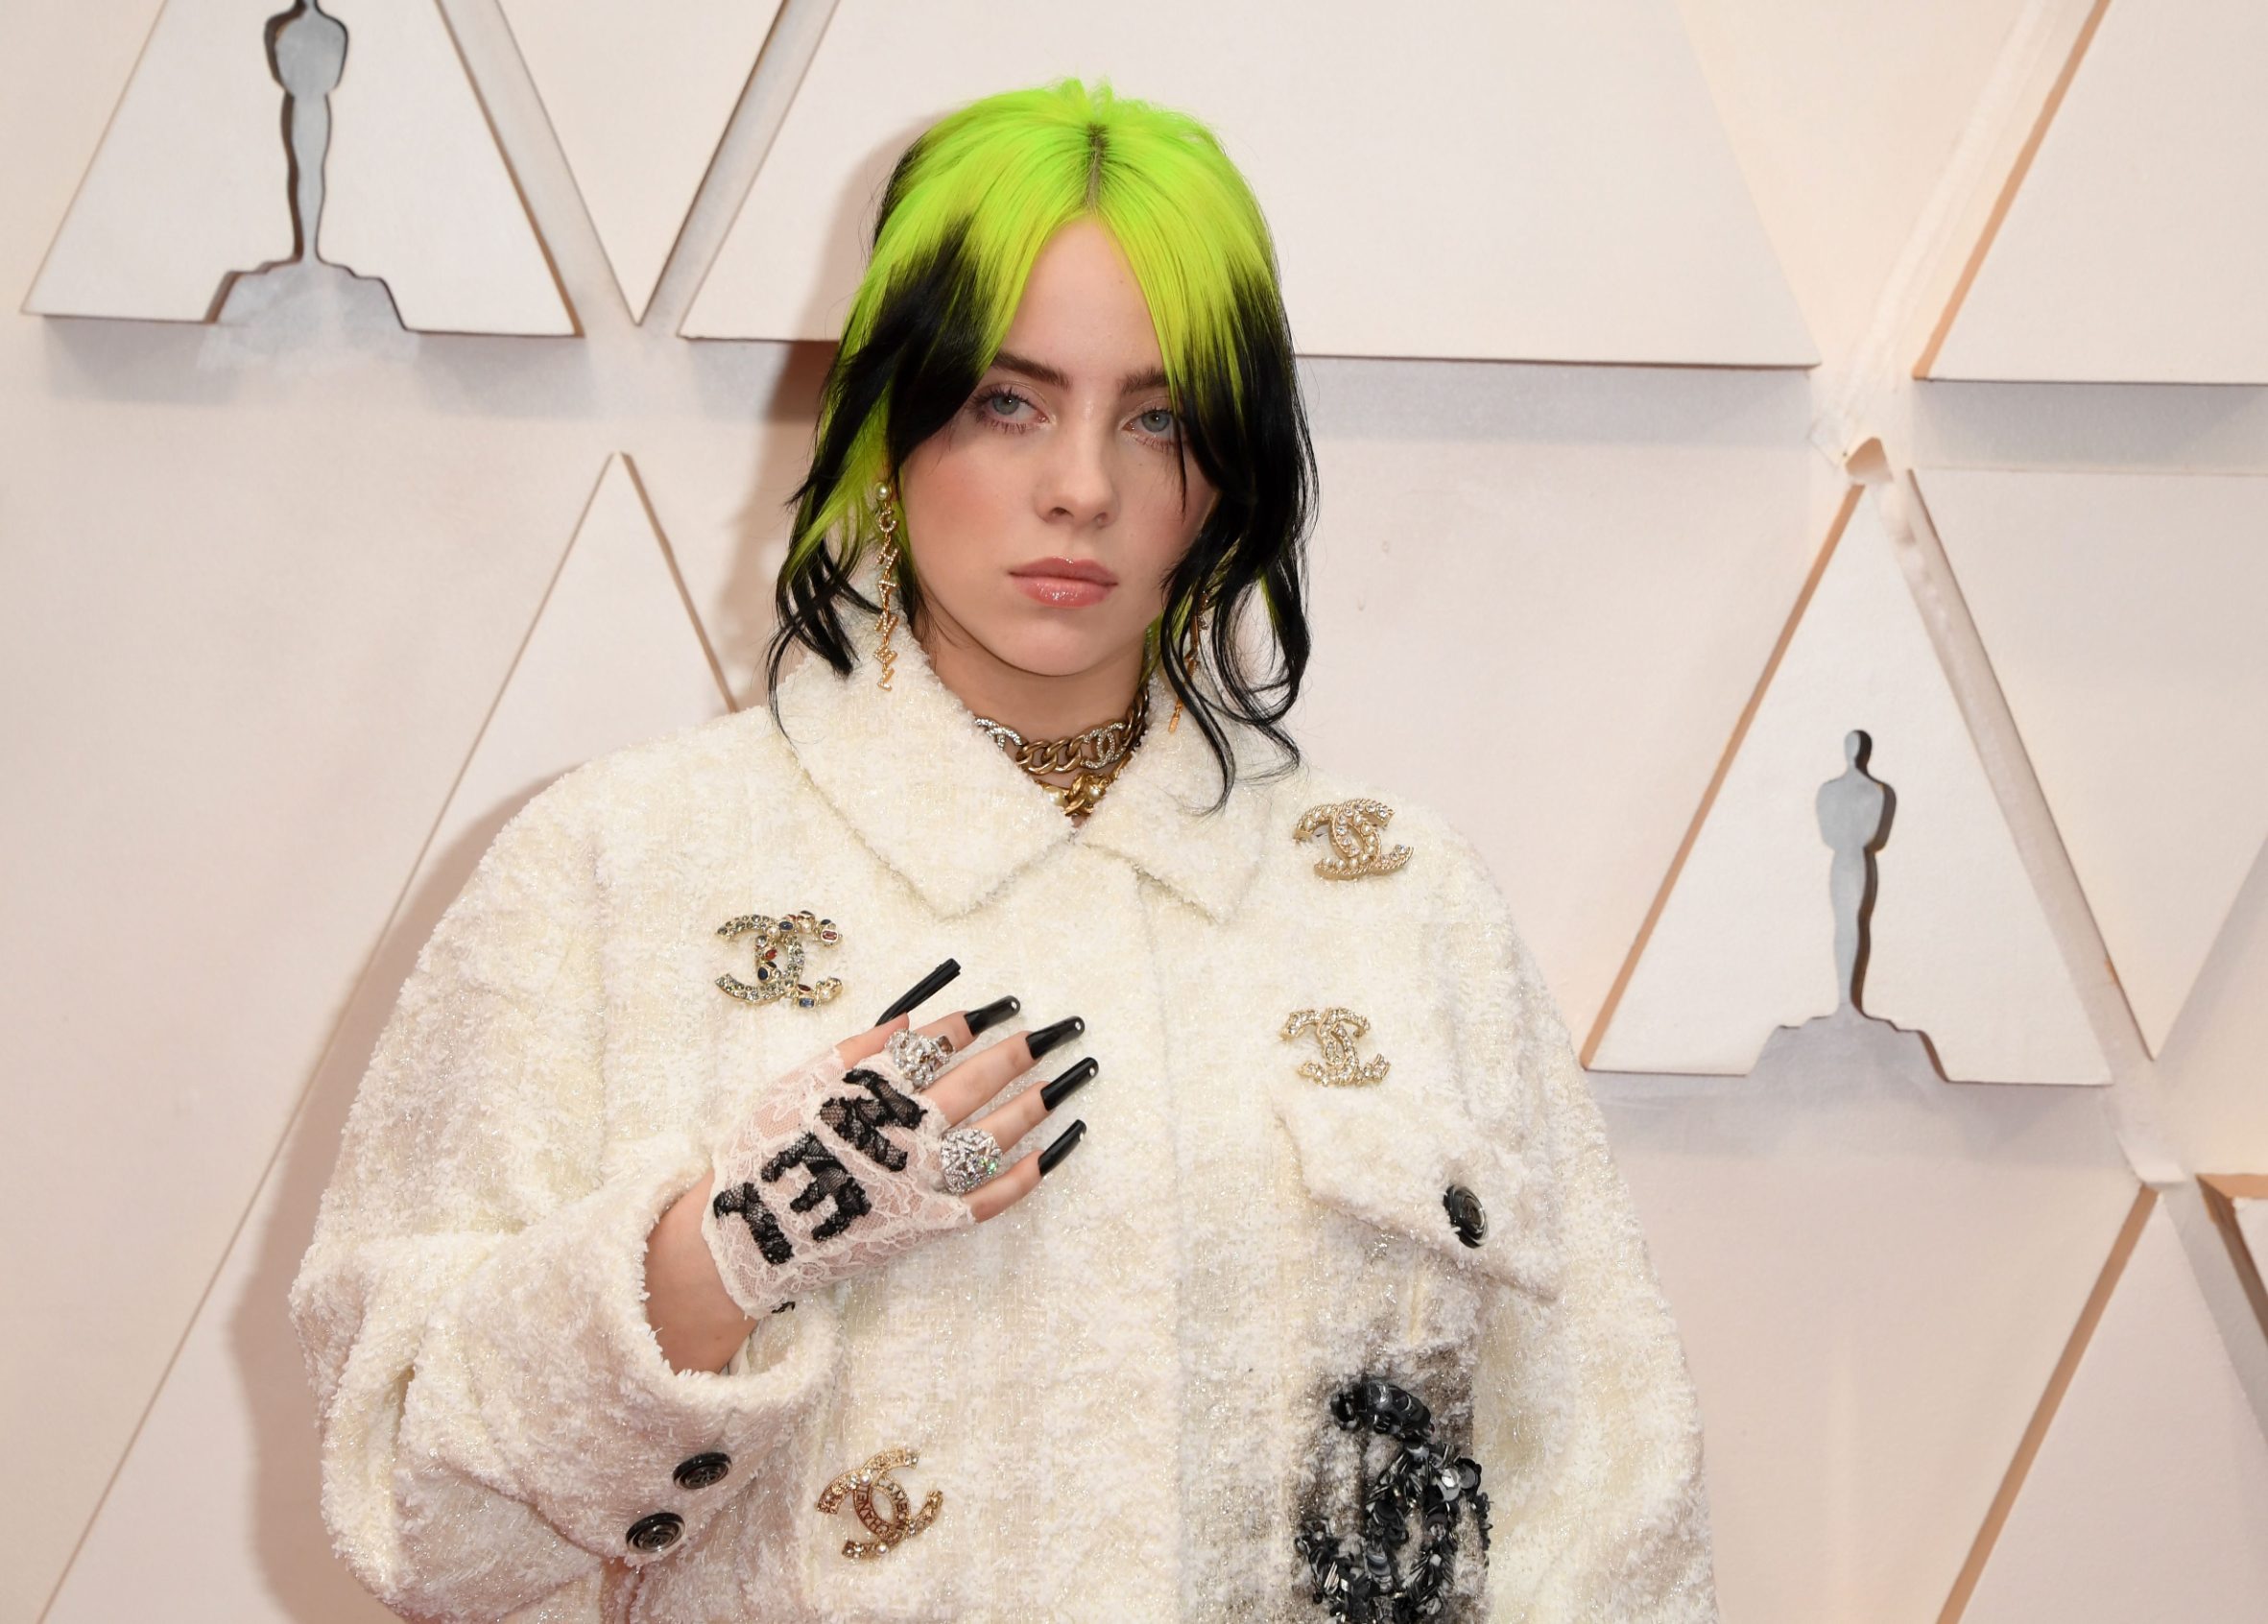 US singer-songwriter Billie Eilish arrives for the 92nd Oscars at the Dolby Theatre in Hollywood, California on February 9, 2020. (Photo by Robyn Beck / AFP)